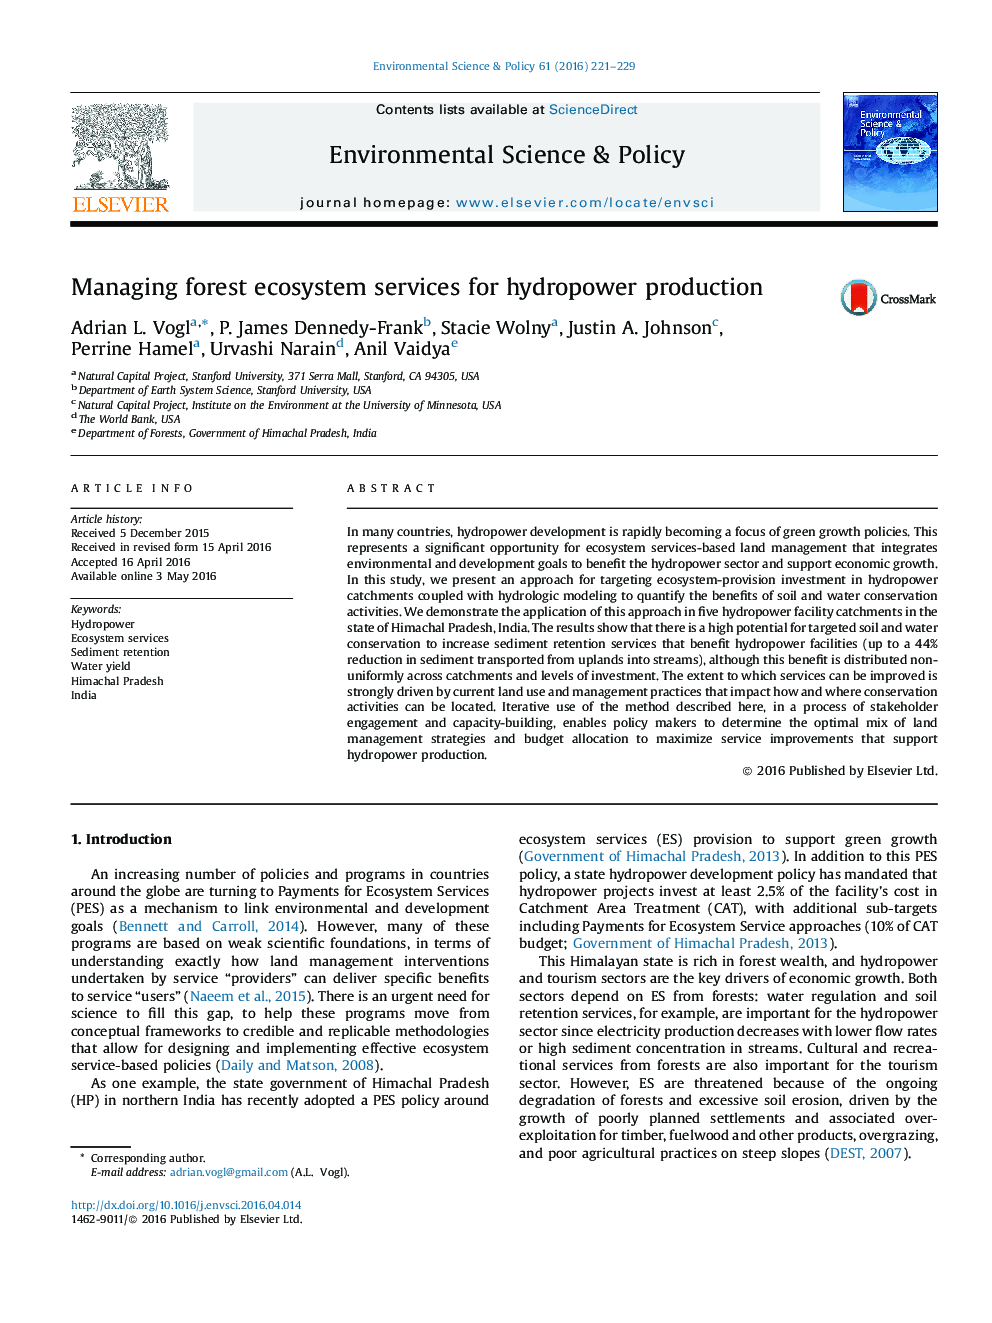 Managing forest ecosystem services for hydropower production